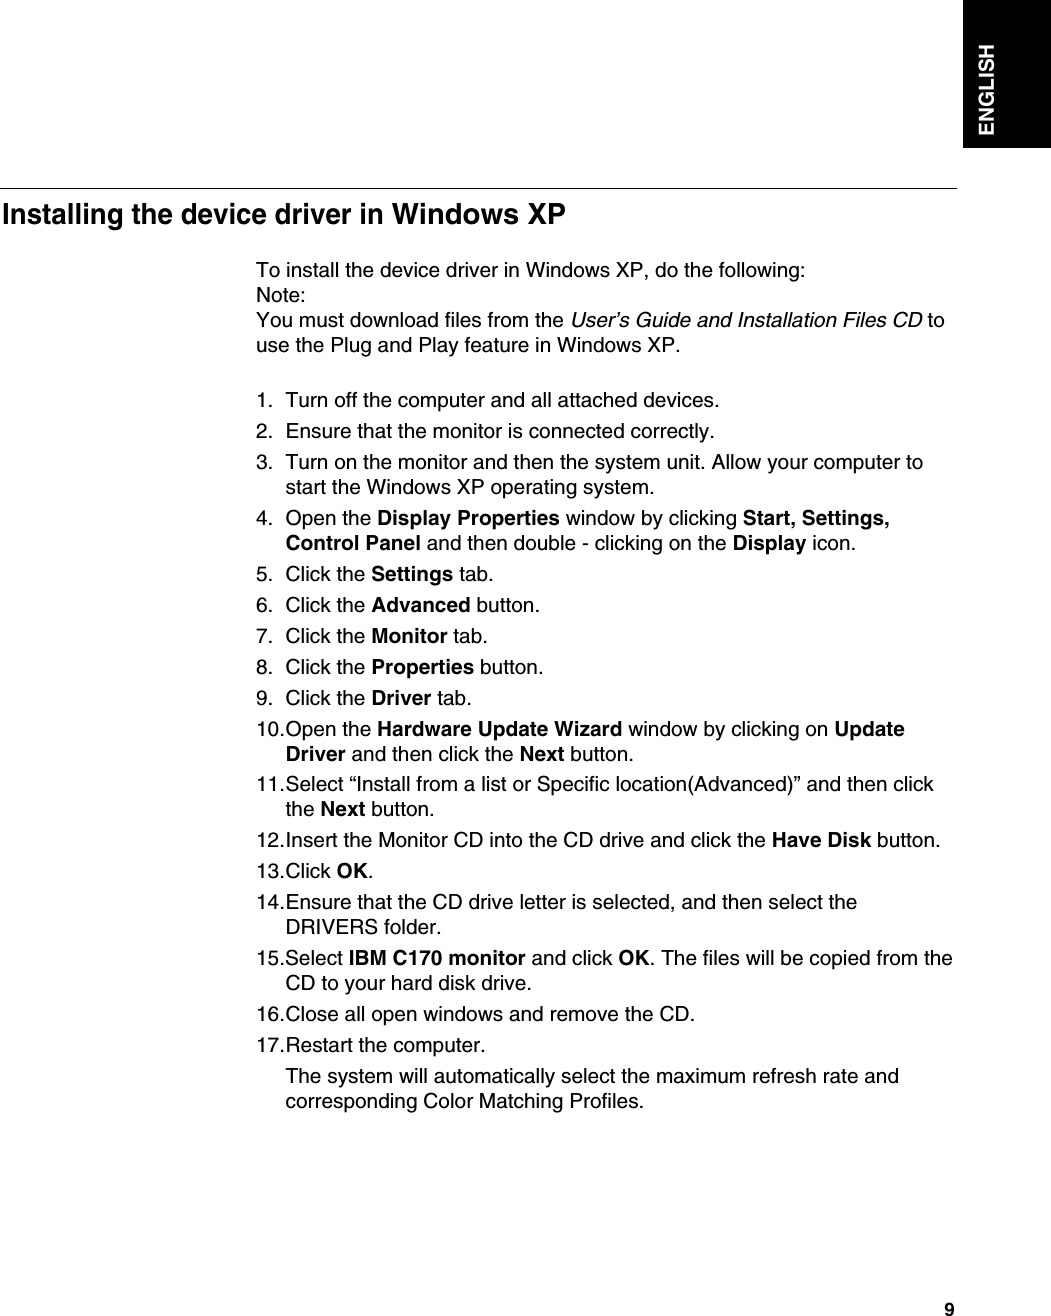 ENGLISH9To install the device driver in Windows XP, do the following: Note:You must download files from the User’s Guide and Installation Files CD touse the Plug and Play feature in Windows XP.1. Turn off the computer and all attached devices.2. Ensure that the monitor is connected correctly.3. Turn on the monitor and then the system unit. Allow your computer tostart the Windows XP operating system.4. Open the Display Properties window by clicking Start, Settings,Control Panel and then double - clicking on the Display icon.5. Click the Settings tab.6. Click the Advanced button.7. Click the Monitor tab.8. Click the Properties button.9. Click the Driver tab.10.Open the Hardware Update Wizard window by clicking on UpdateDriver and then click the Next button.11.Select “Install from a list or Specific location(Advanced)” and then clickthe Next button.12.Insert the Monitor CD into the CD drive and click the Have Disk button.13.Click OK.14.Ensure that the CD drive letter is selected, and then select theDRIVERS folder.15.Select IBM C170 monitor and click OK. The files will be copied from theCD to your hard disk drive.16.Close all open windows and remove the CD.17.Restart the computer.The system will automatically select the maximum refresh rate andcorresponding Color Matching Profiles.Installing the device driver in Windows XP 